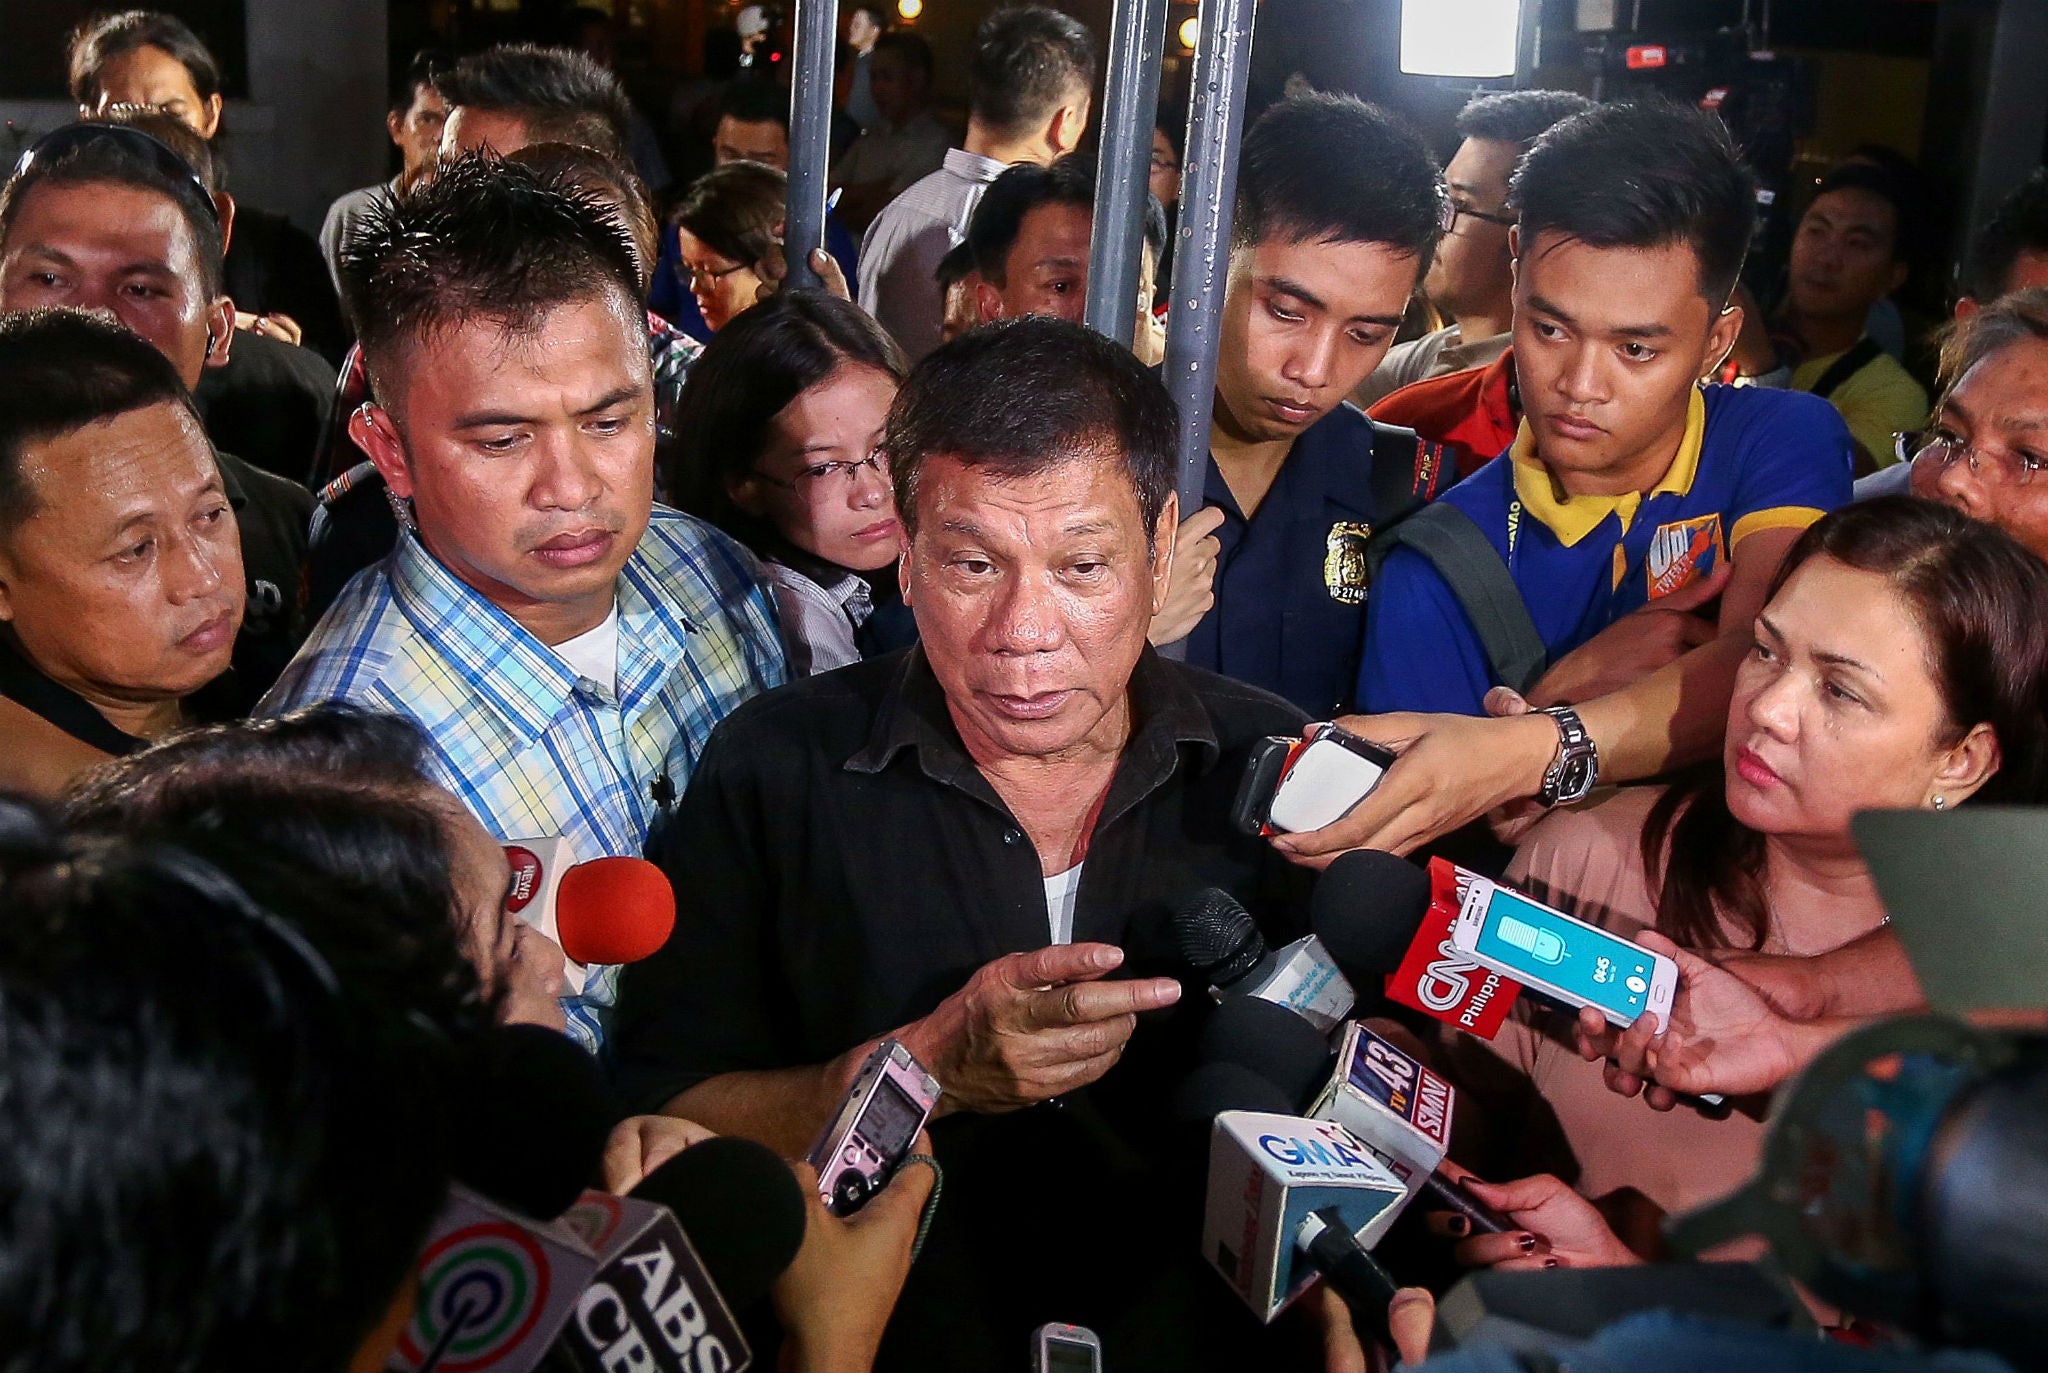 Rodrigo Duterte is due to be sworn in as the new President of the Philippines on 30 June